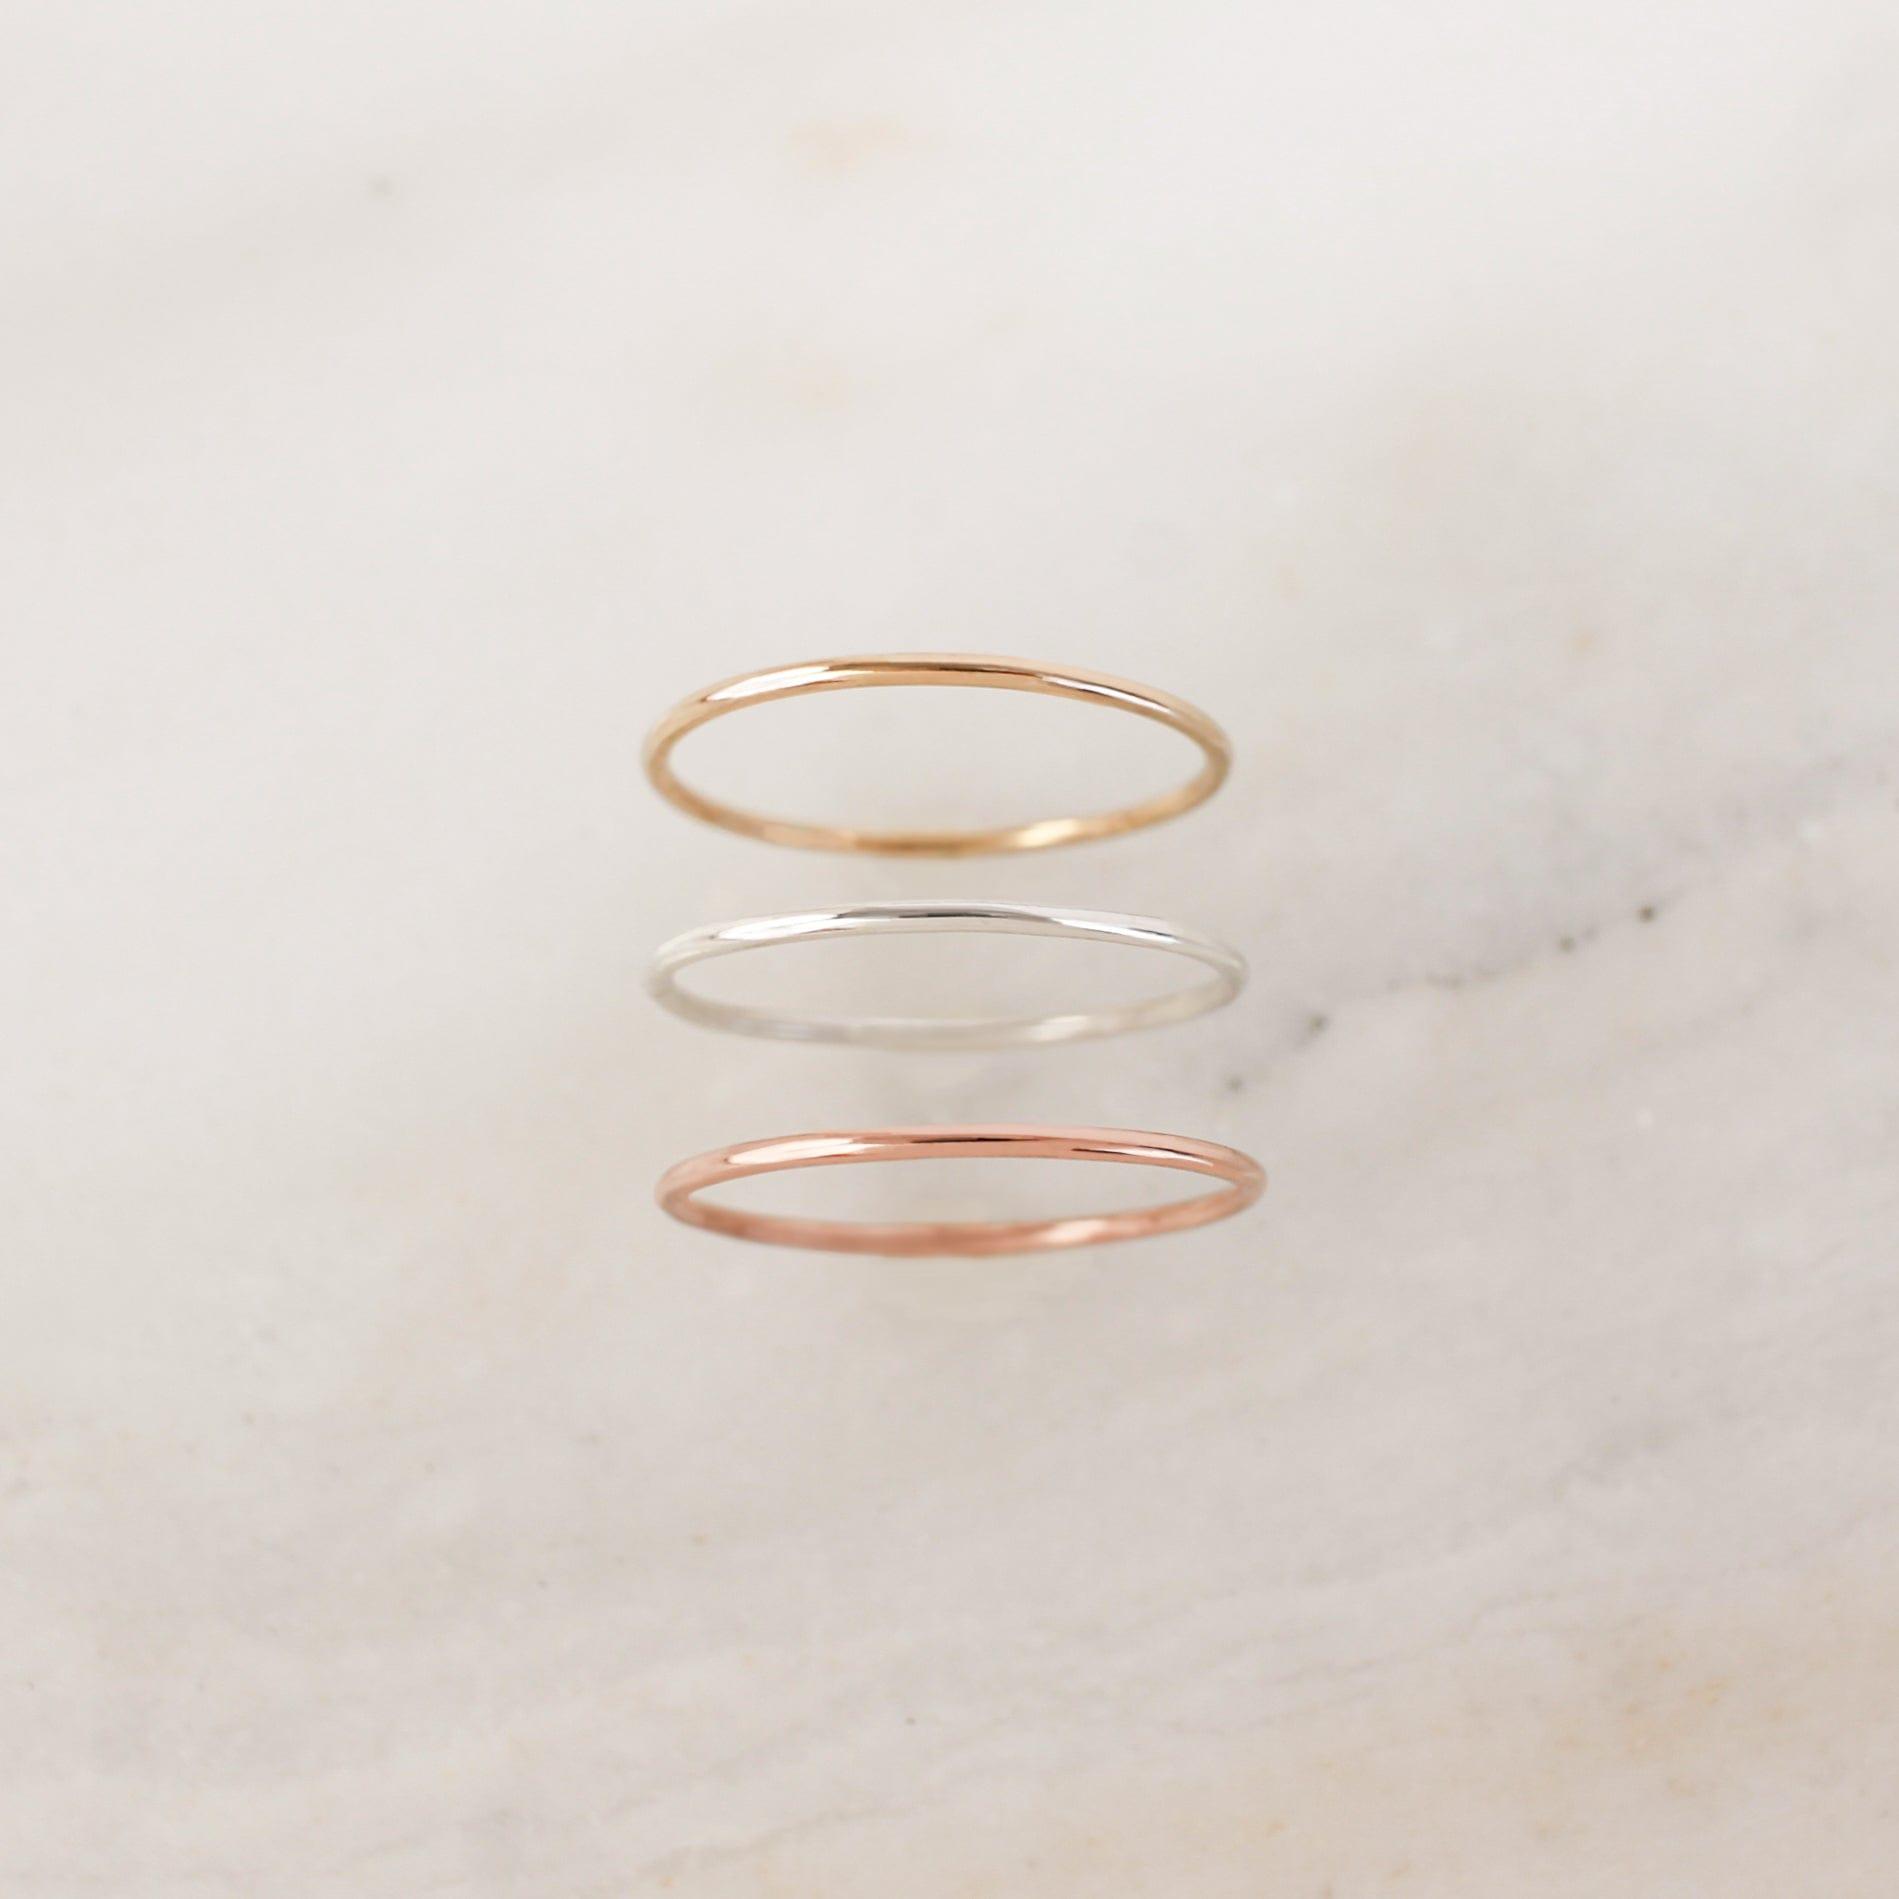 Smooth Skinny Rings - Nolia Jewelry - Meaningful + Sustainably Handcrafted Jewelry